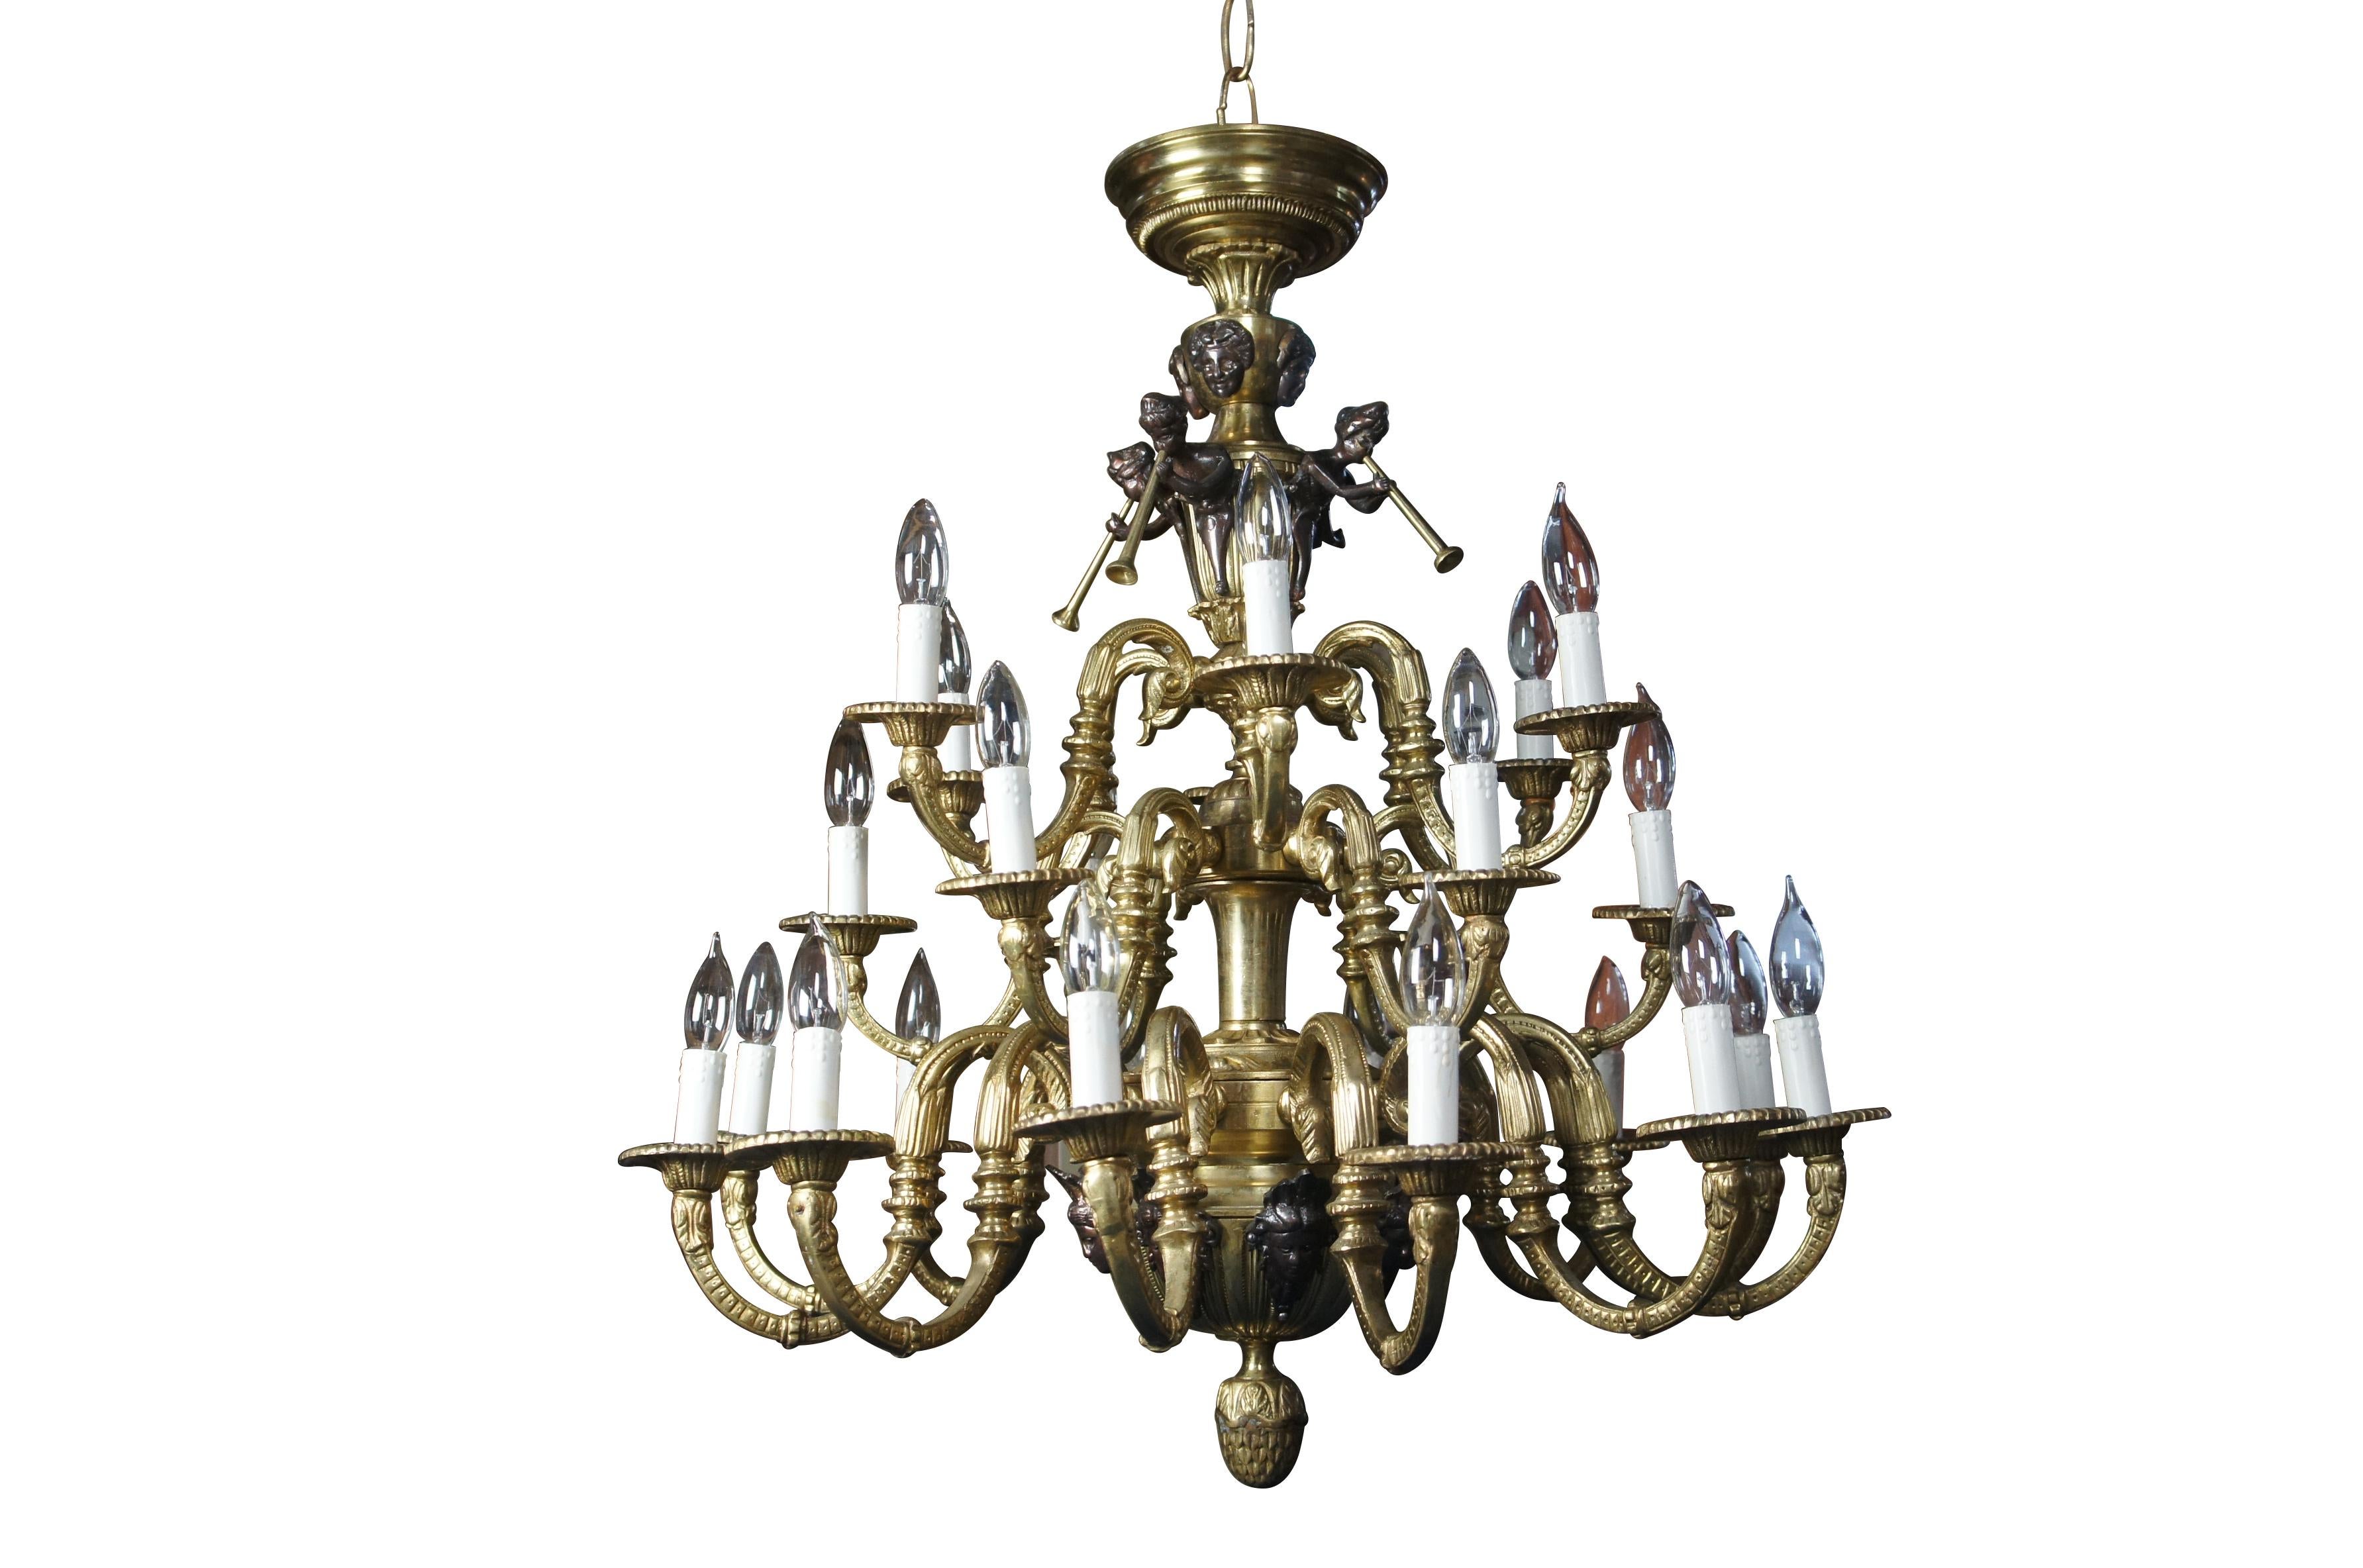 Impressive Louis XV / French Empire / Pierre Gouthière style gilt bronze twenty four light, three tier Cherub / angel / trumpet candlestick chandelier.  Made of gilt bronze featuring Cherubs / Puttis / Angels playing trumpets, surrounded by three